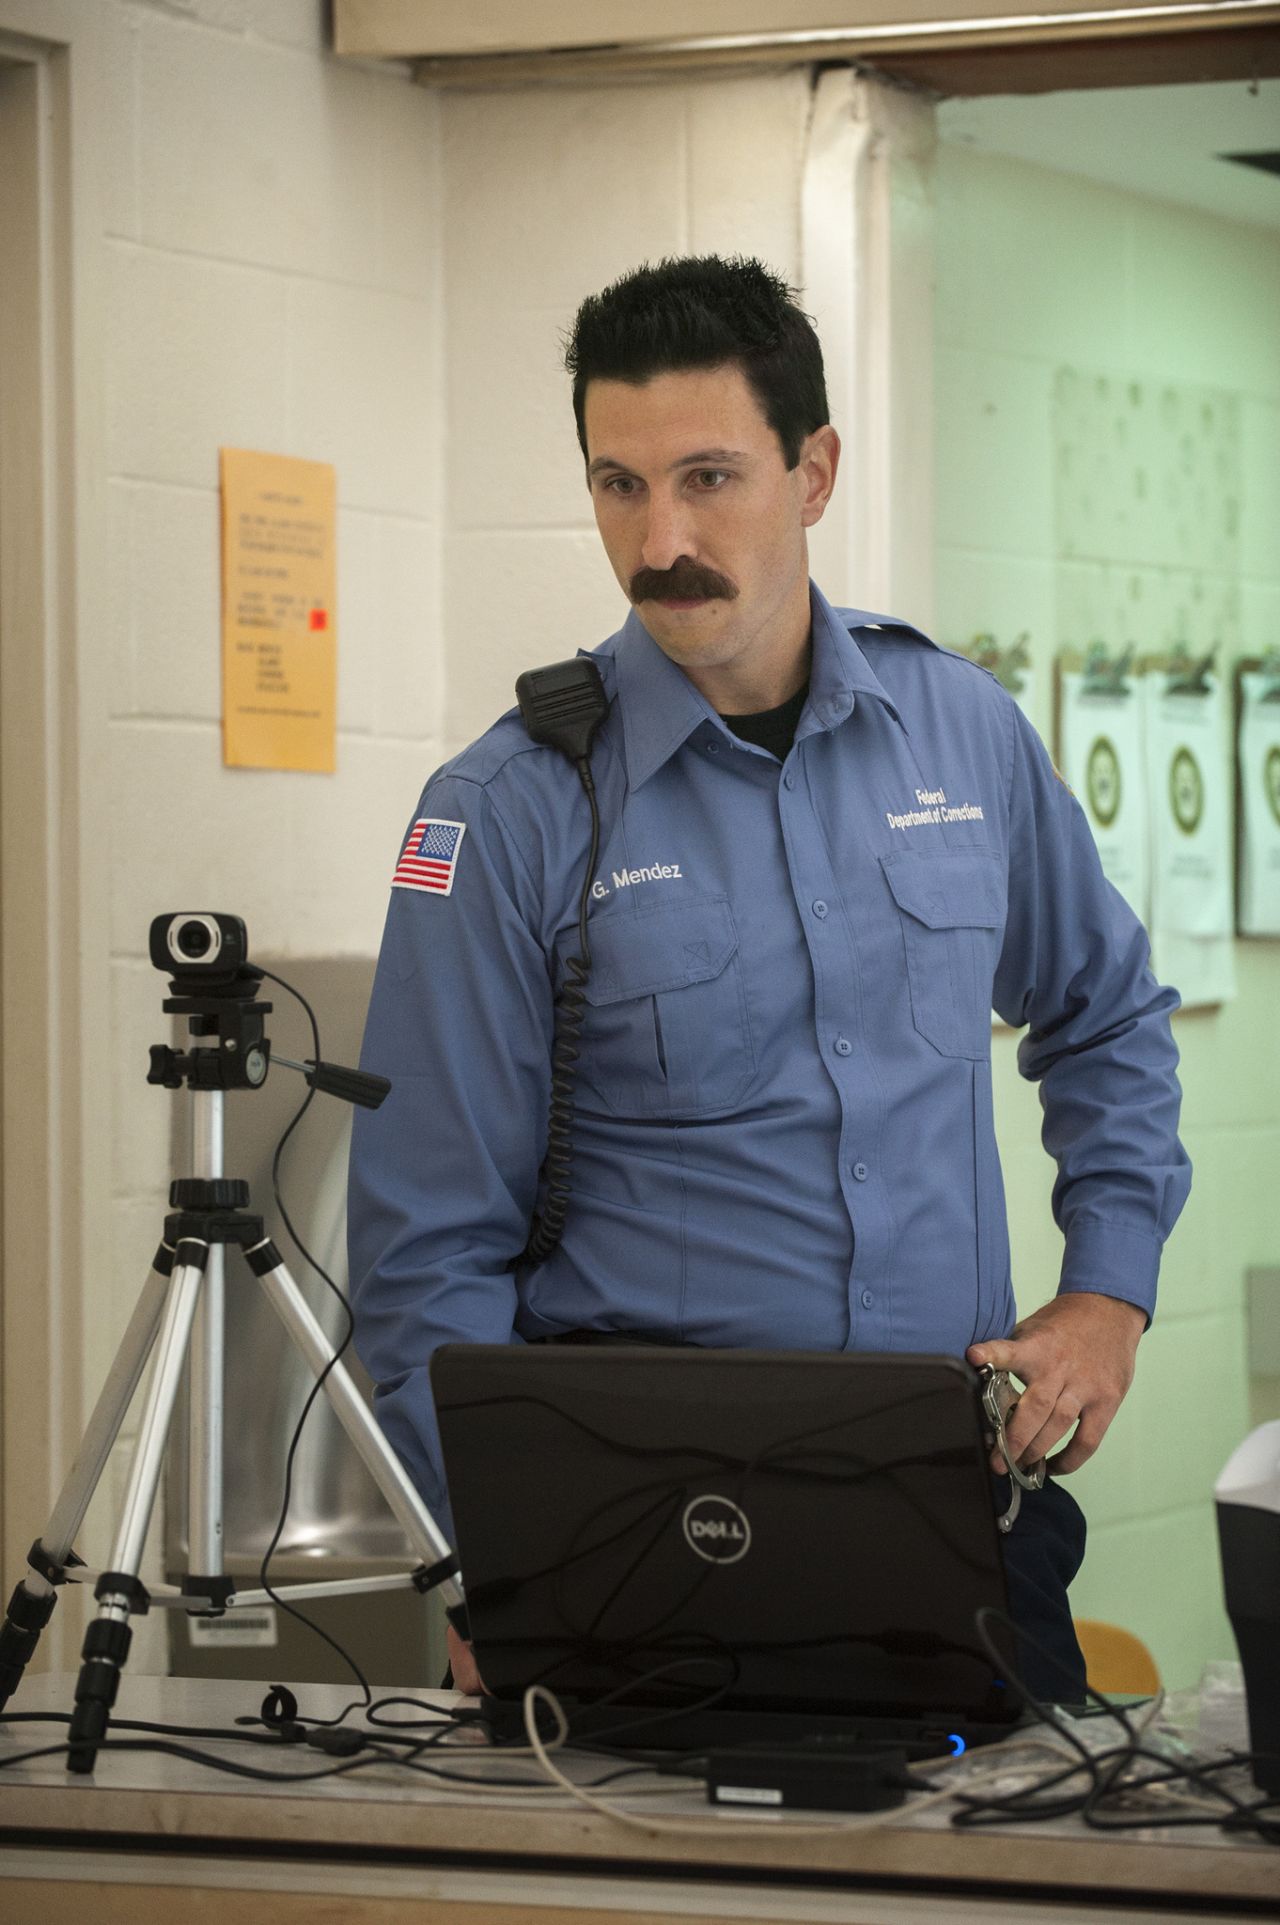 Pablo Schreiber plays corrupt prison guard George Mendez, better known as Pornstache (one guess why). He breaks all the rules, from smuggling drugs into the prison to having sex with inmates. In season one, he is suspended without pay for his actions.